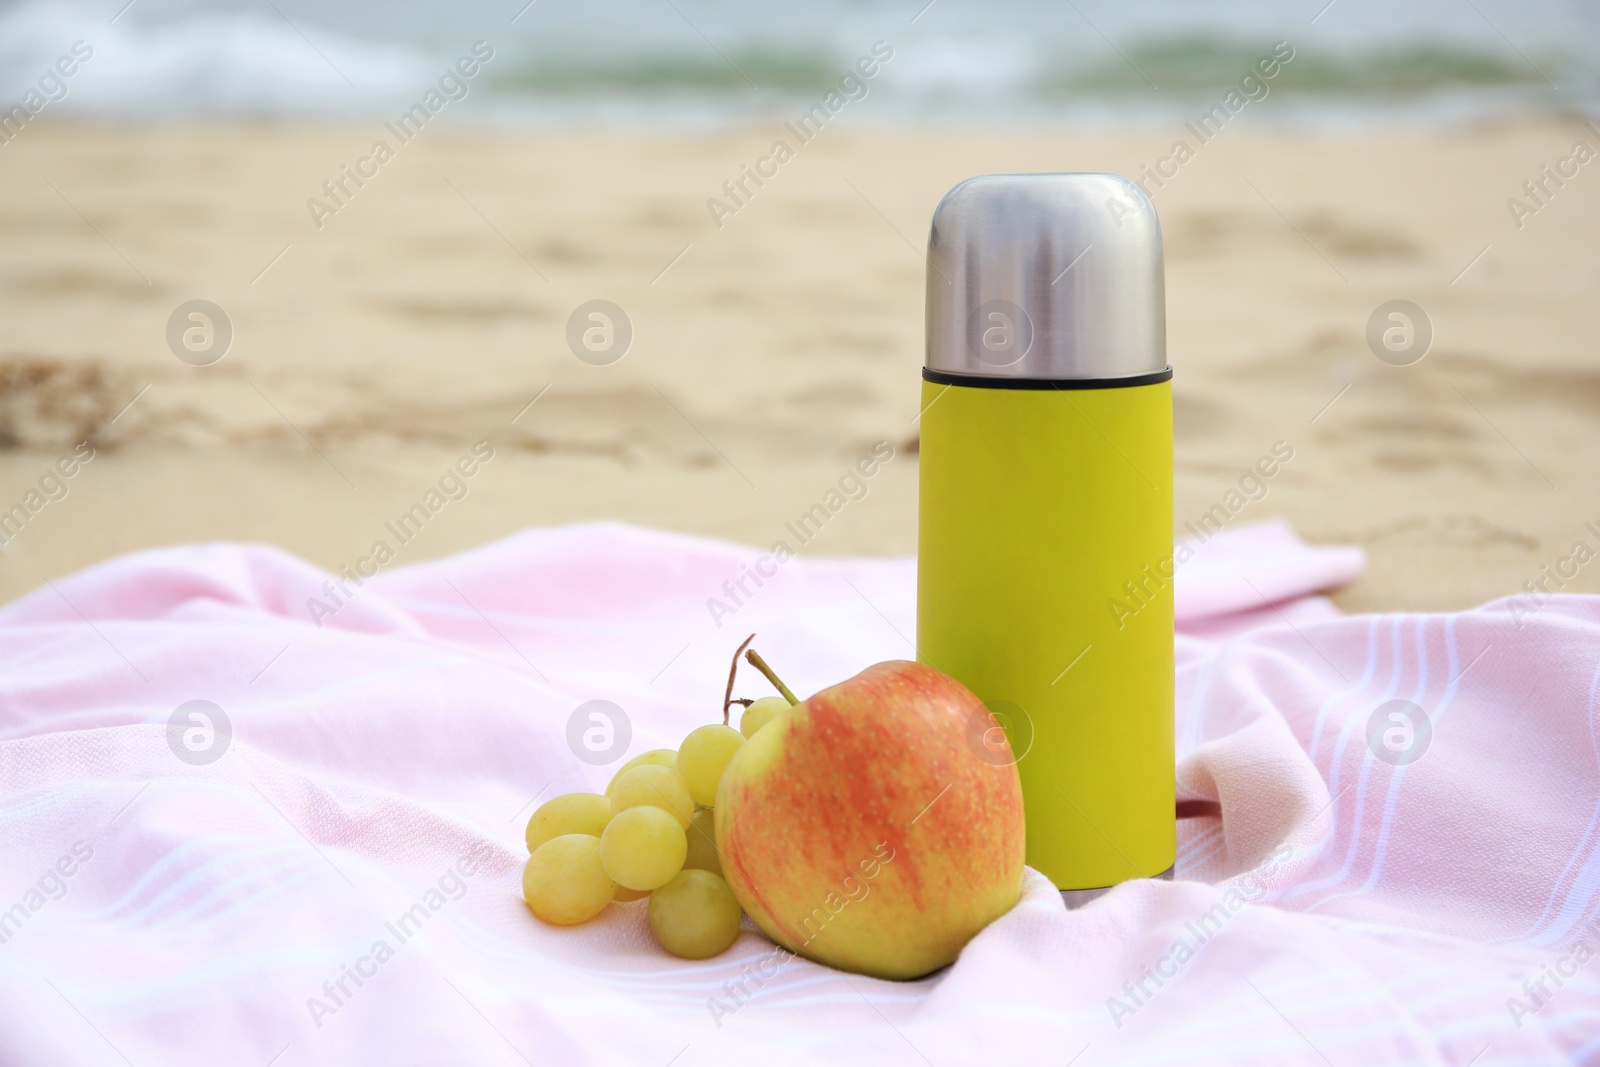 Photo of Metallic thermos with hot drink, fruits and plaid on sandy beach near sea